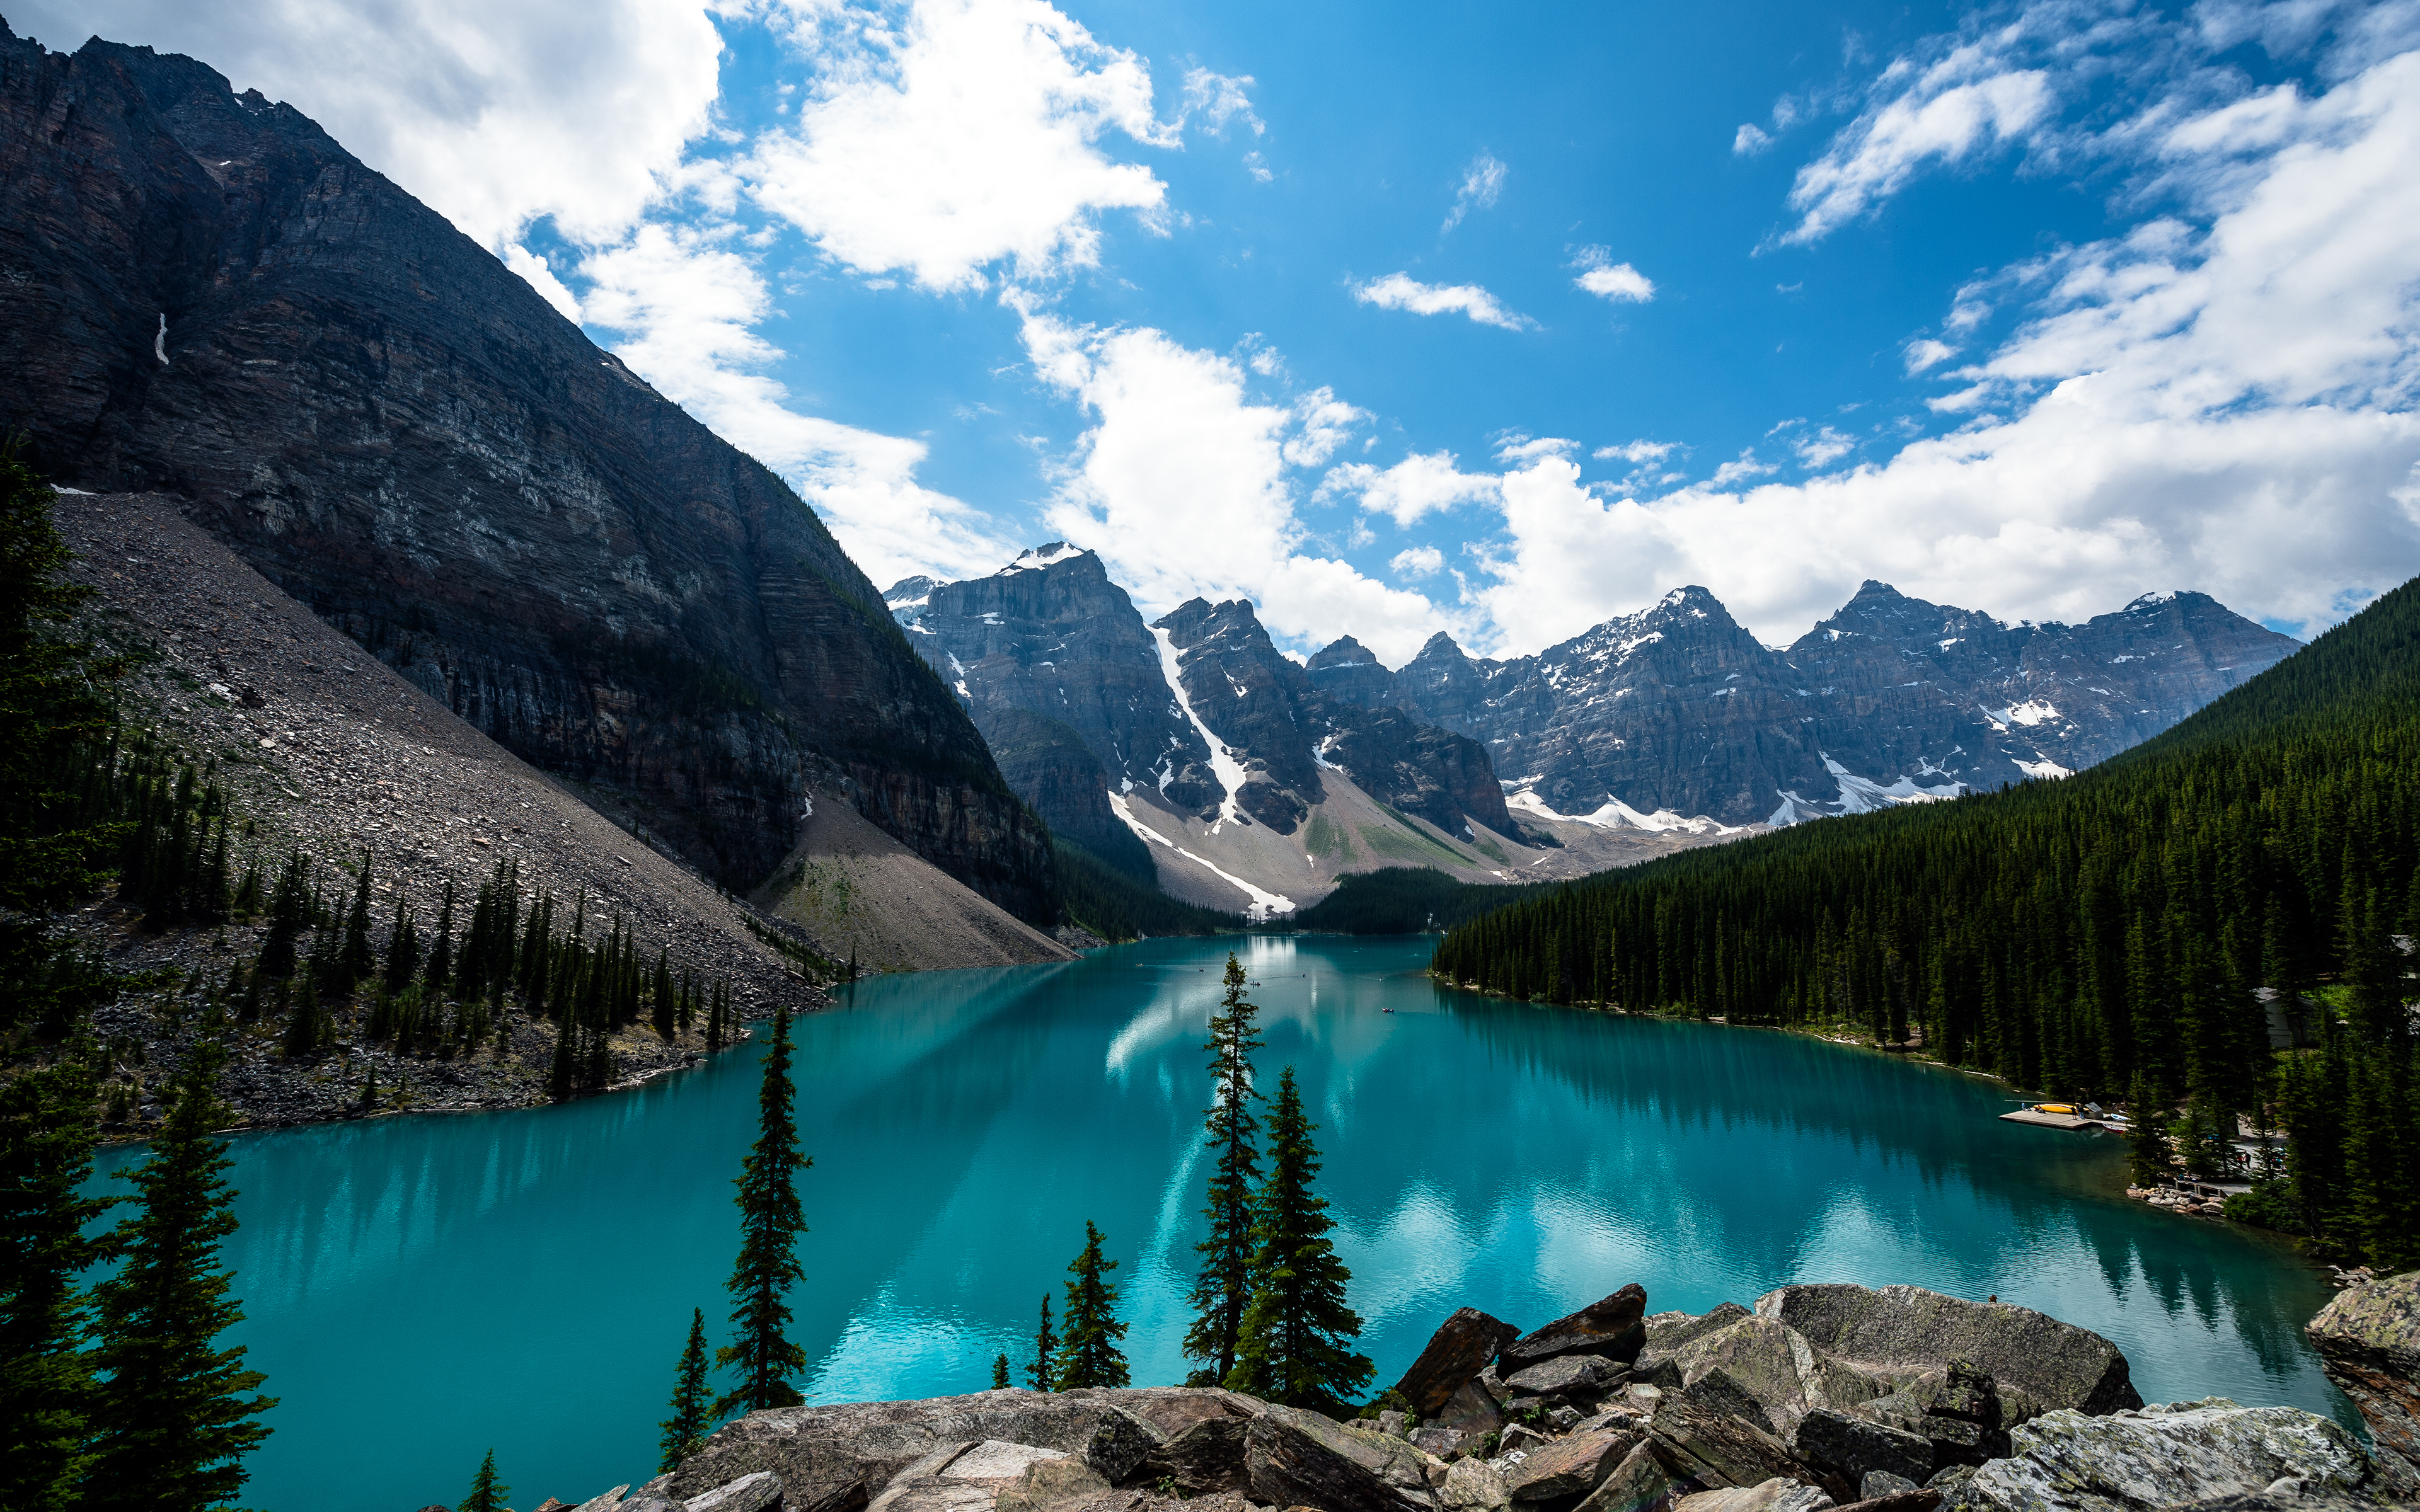  Alberta Canada wallpapers and images   wallpapers pictures photos